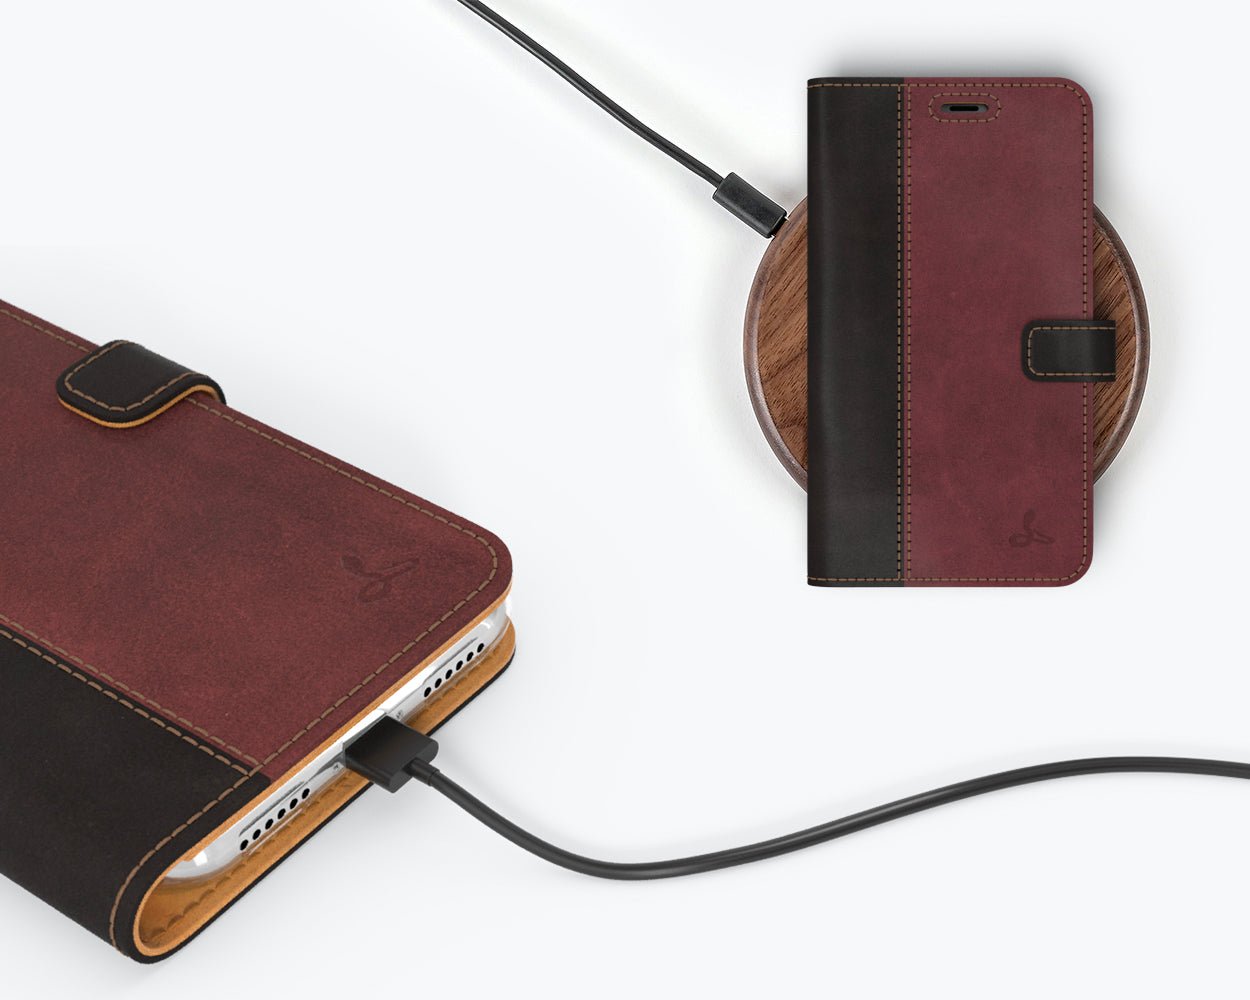 Vintage Two Tone Leather Wallet - Apple iPhone XS Max TT Black/Plum Apple iPhone XS Max - Snakehive UK